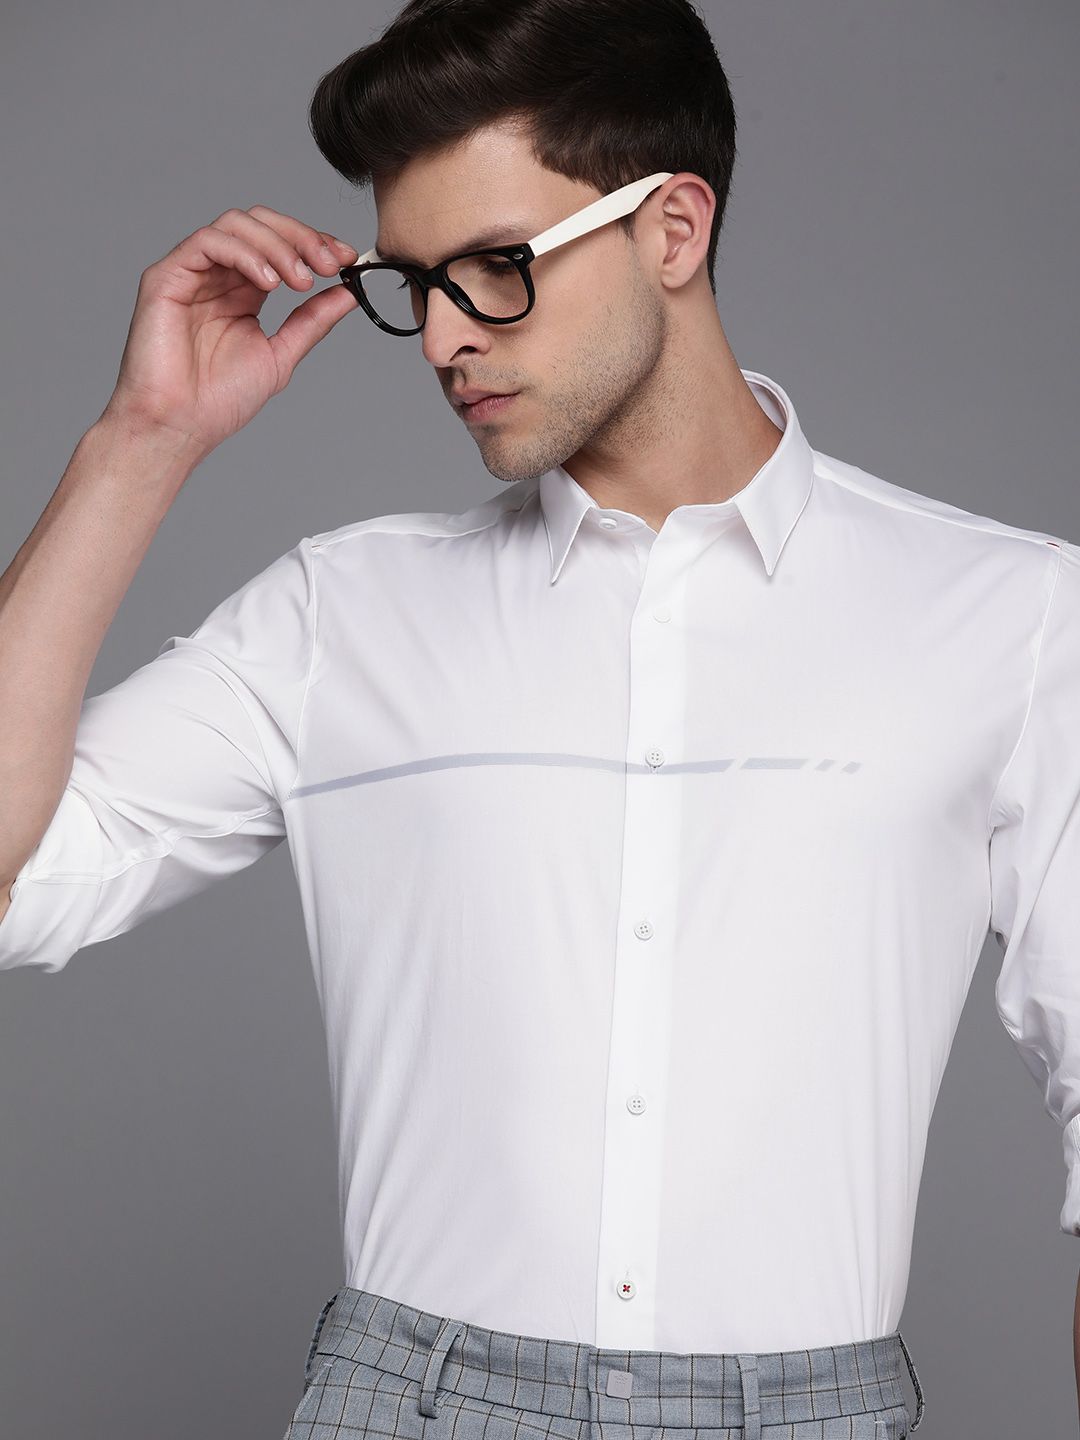 Buy Louis Philippe Louis Philippe Opaque Formal Shirt at Redfynd